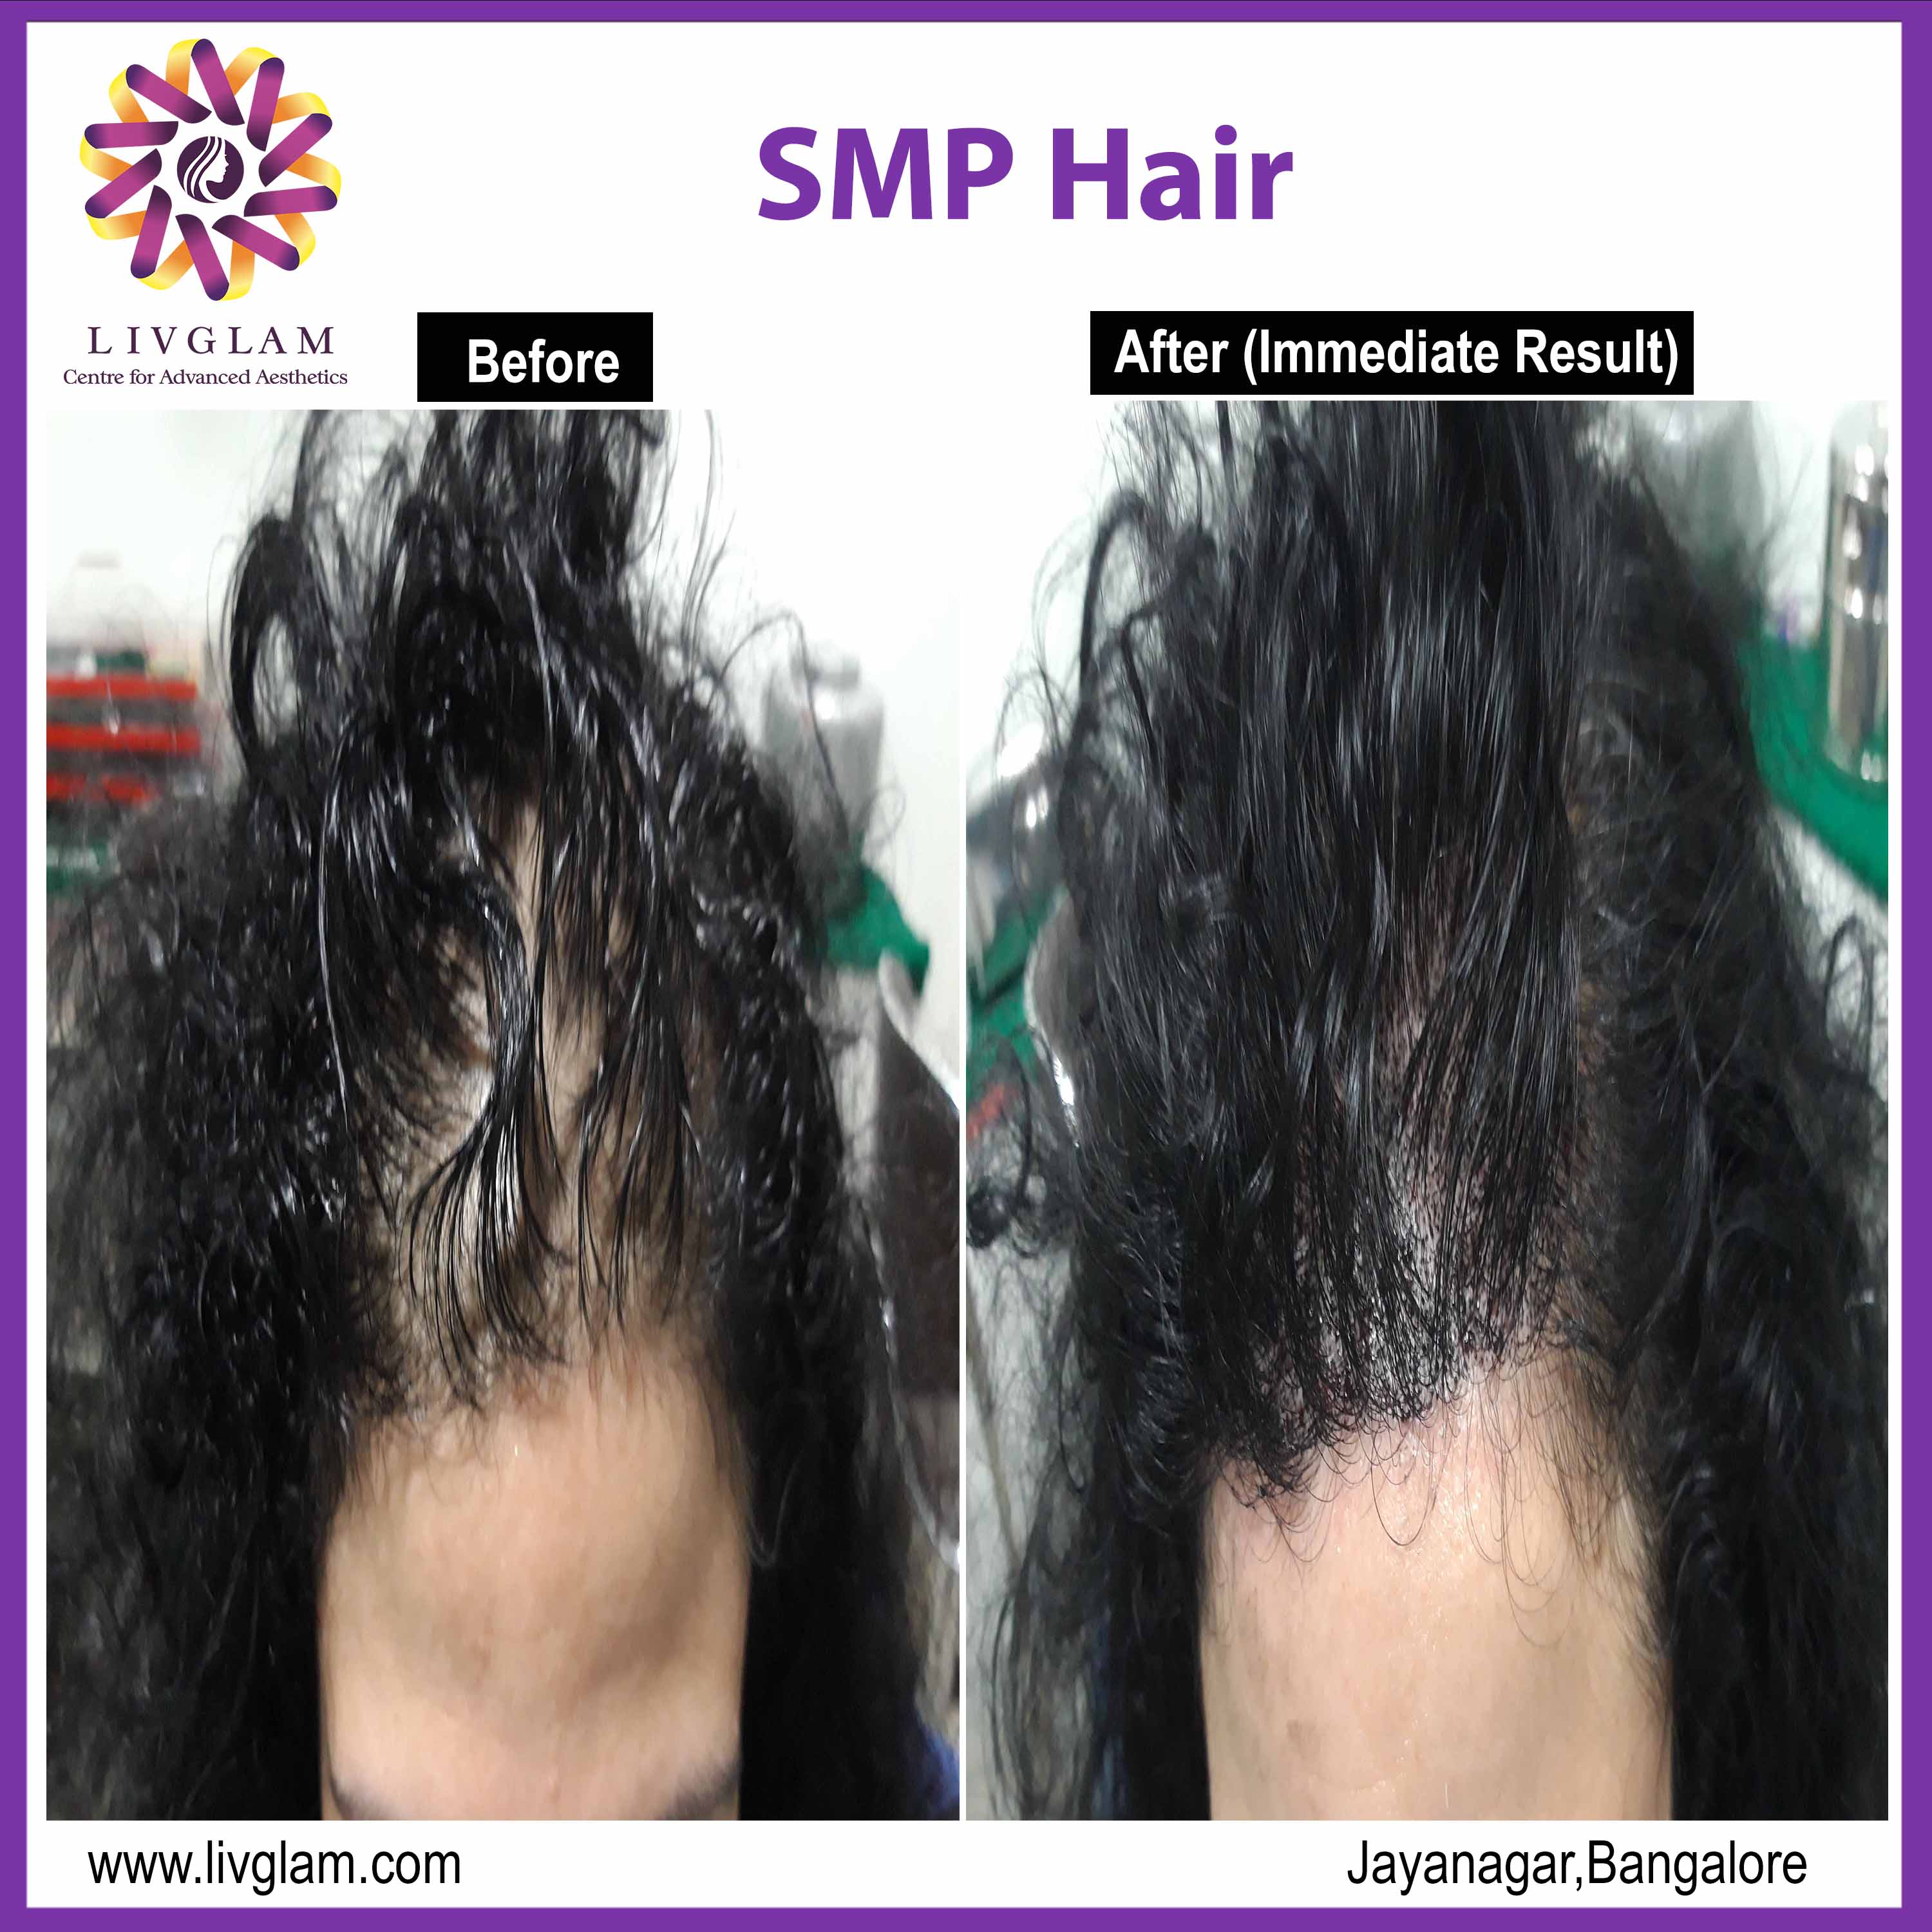 smp hair treatment cost in bangalore